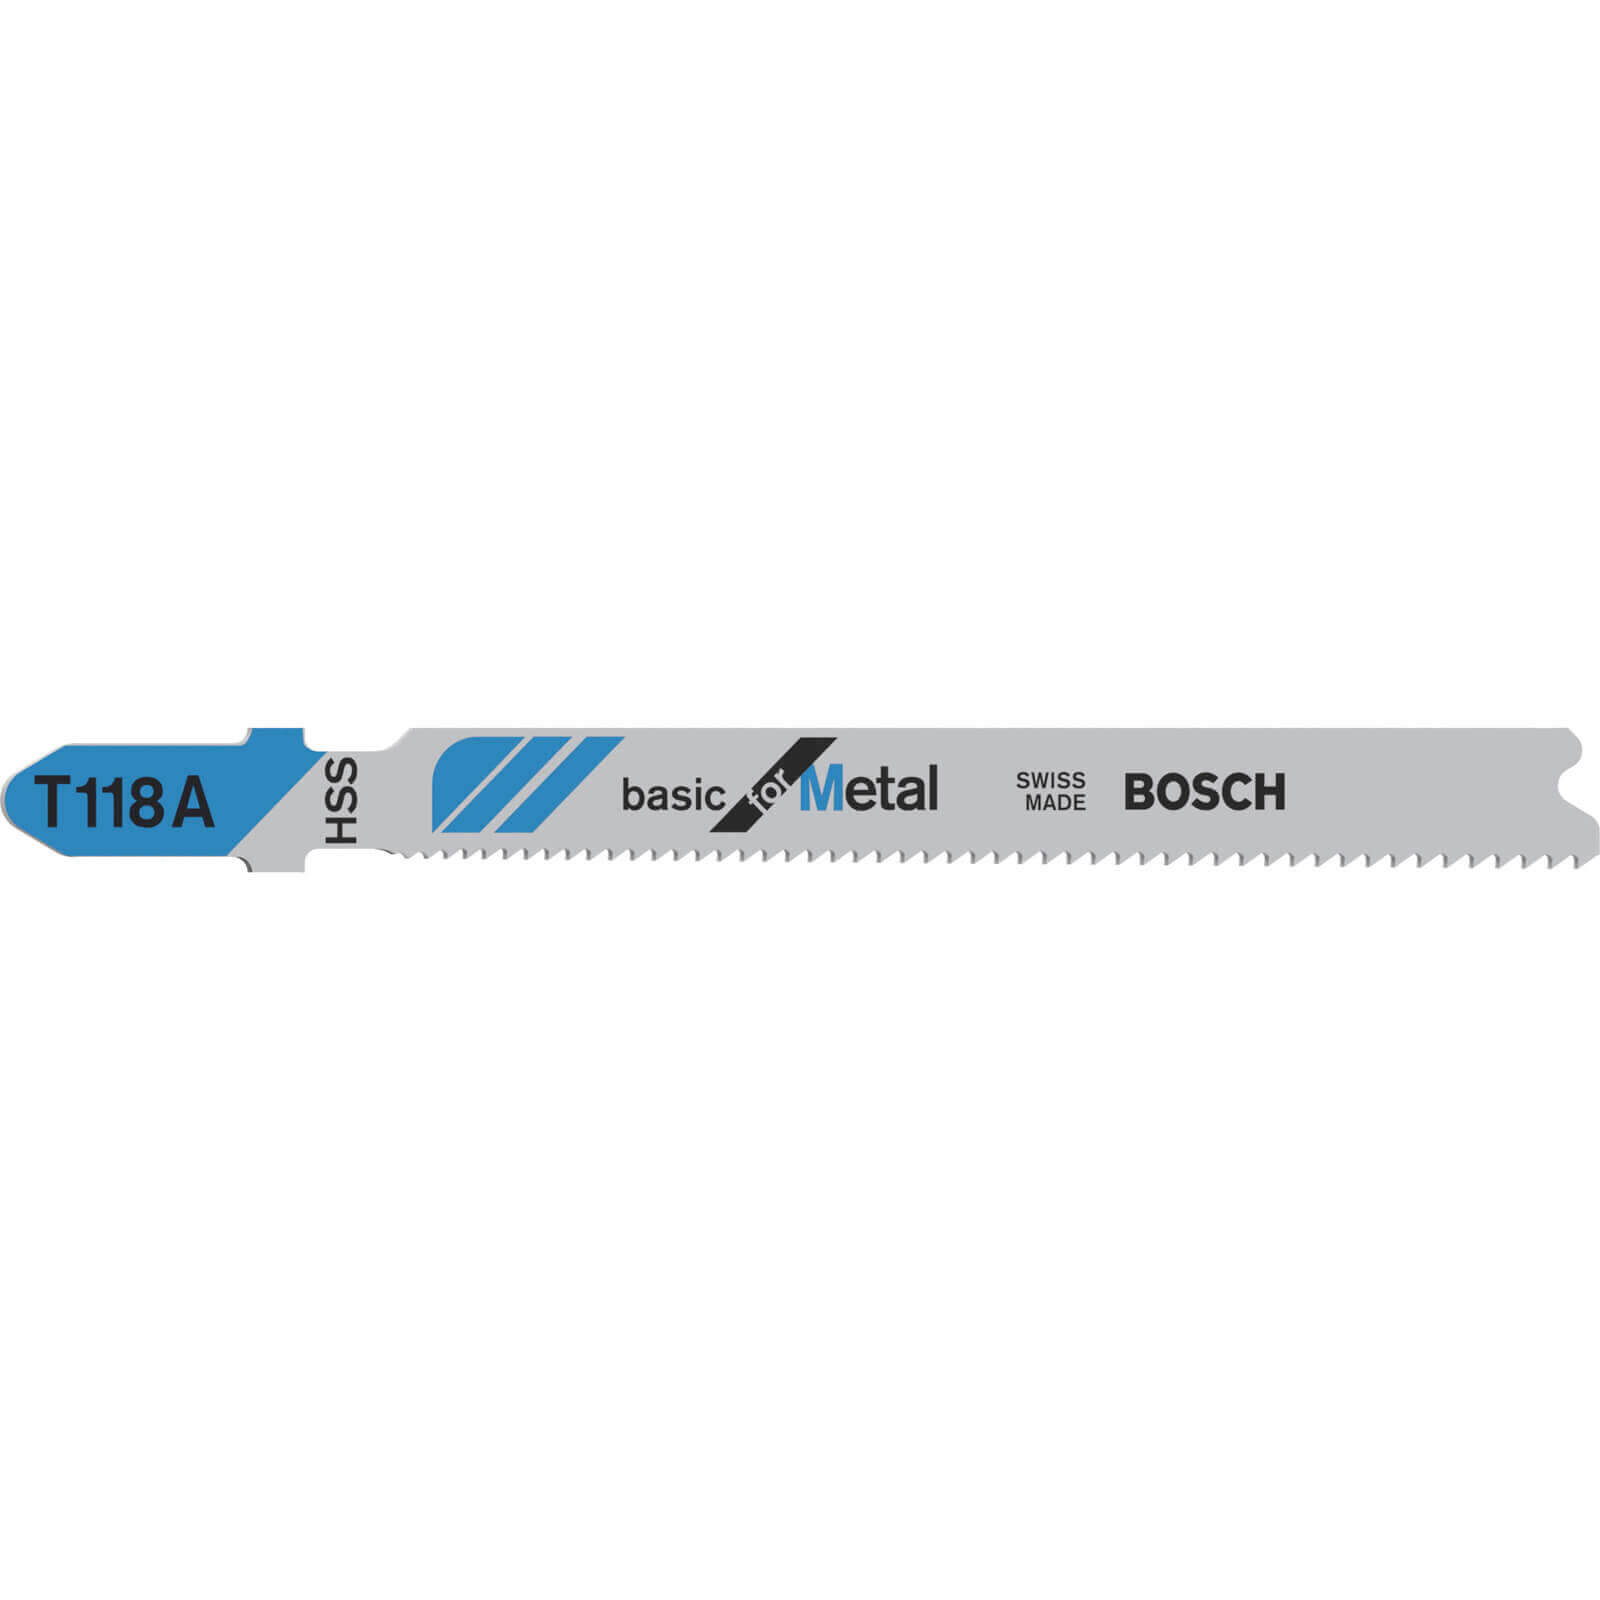 Image of Bosch T118 A Metal Cutting Jigsaw Blades Pack of 5